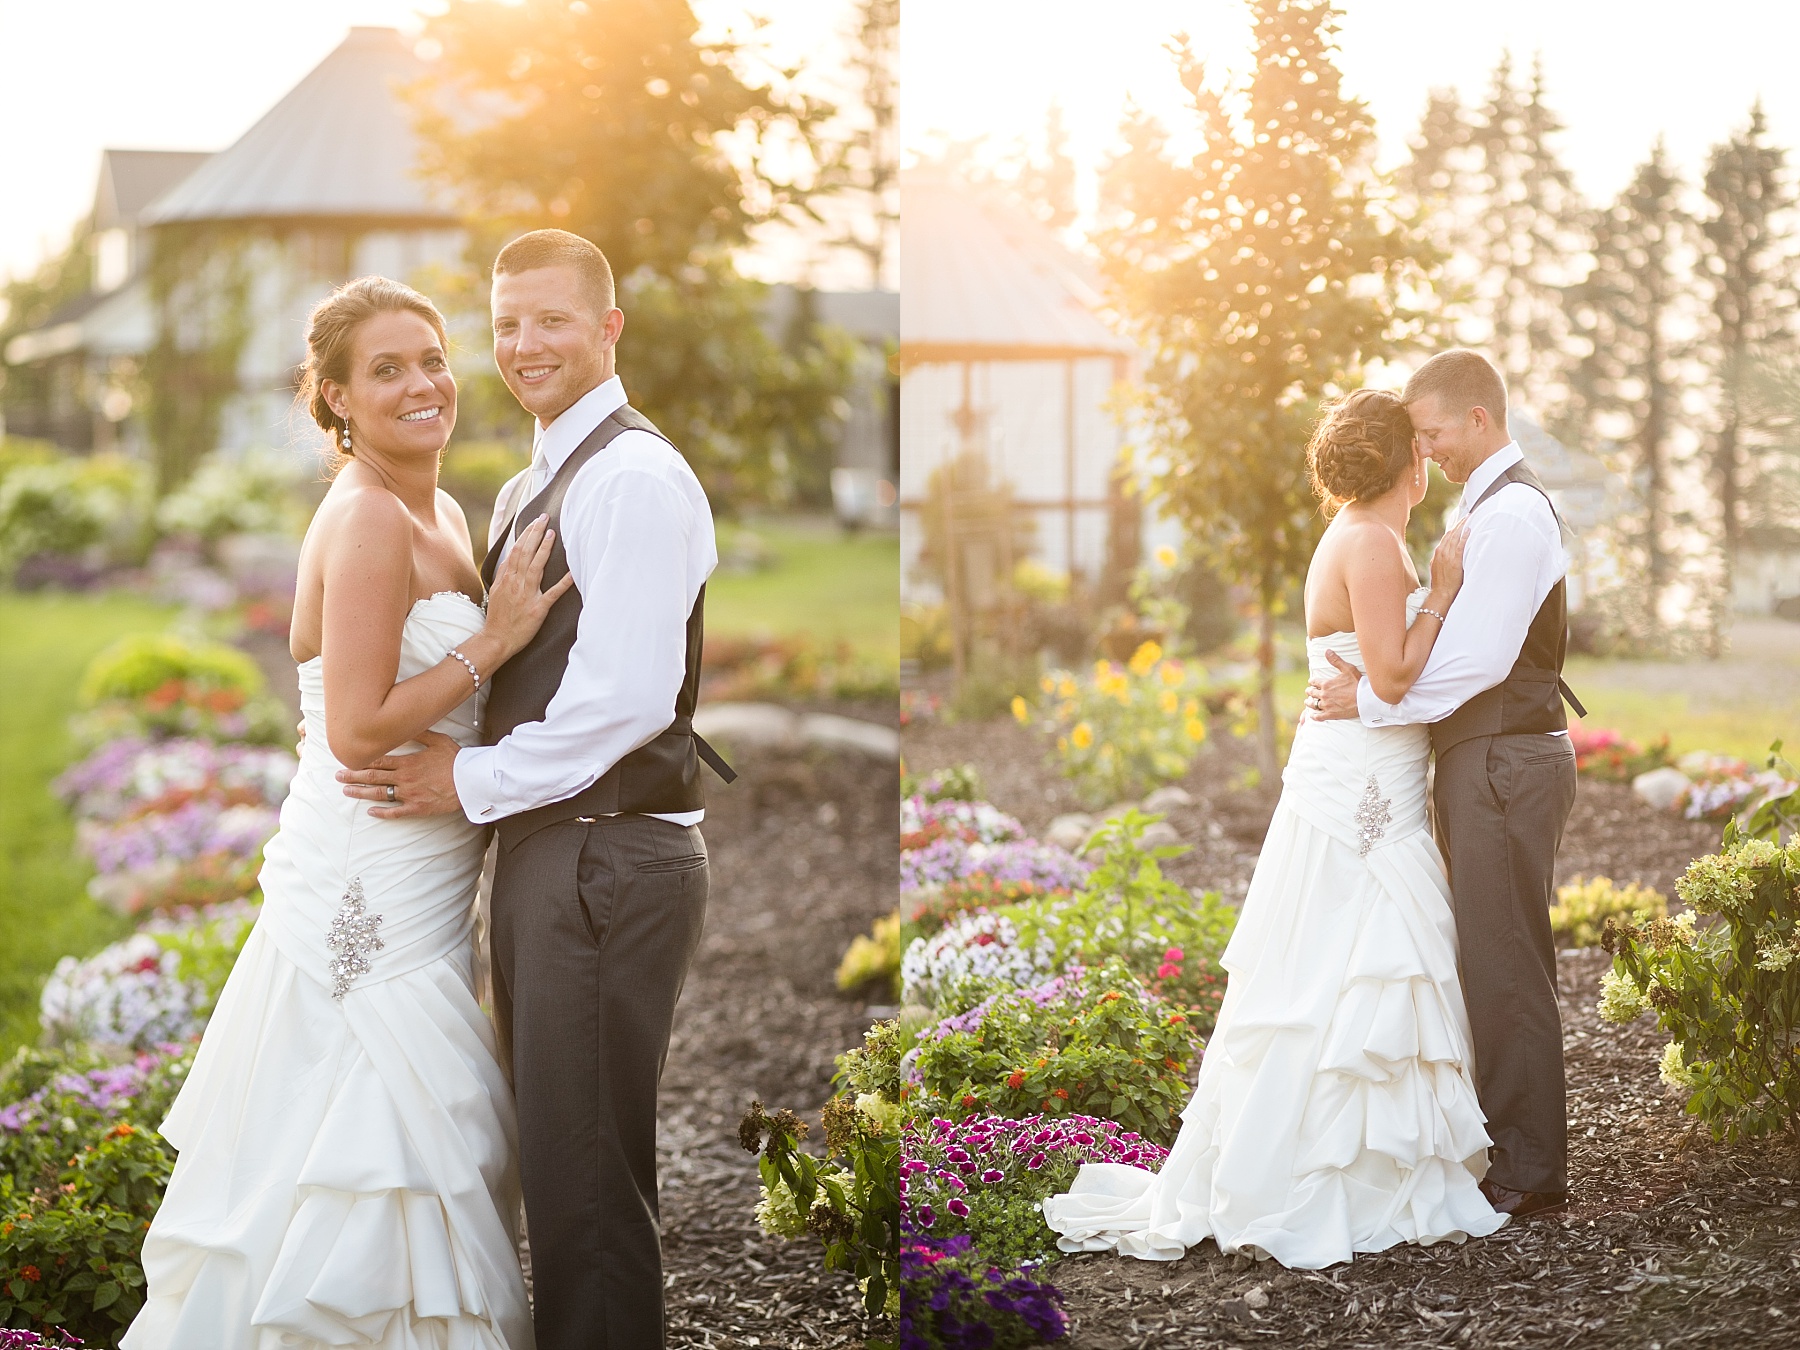 Marie & Austin were married on a hot August Saturday at The Barn on Stoney Hill in Cadott, WI.